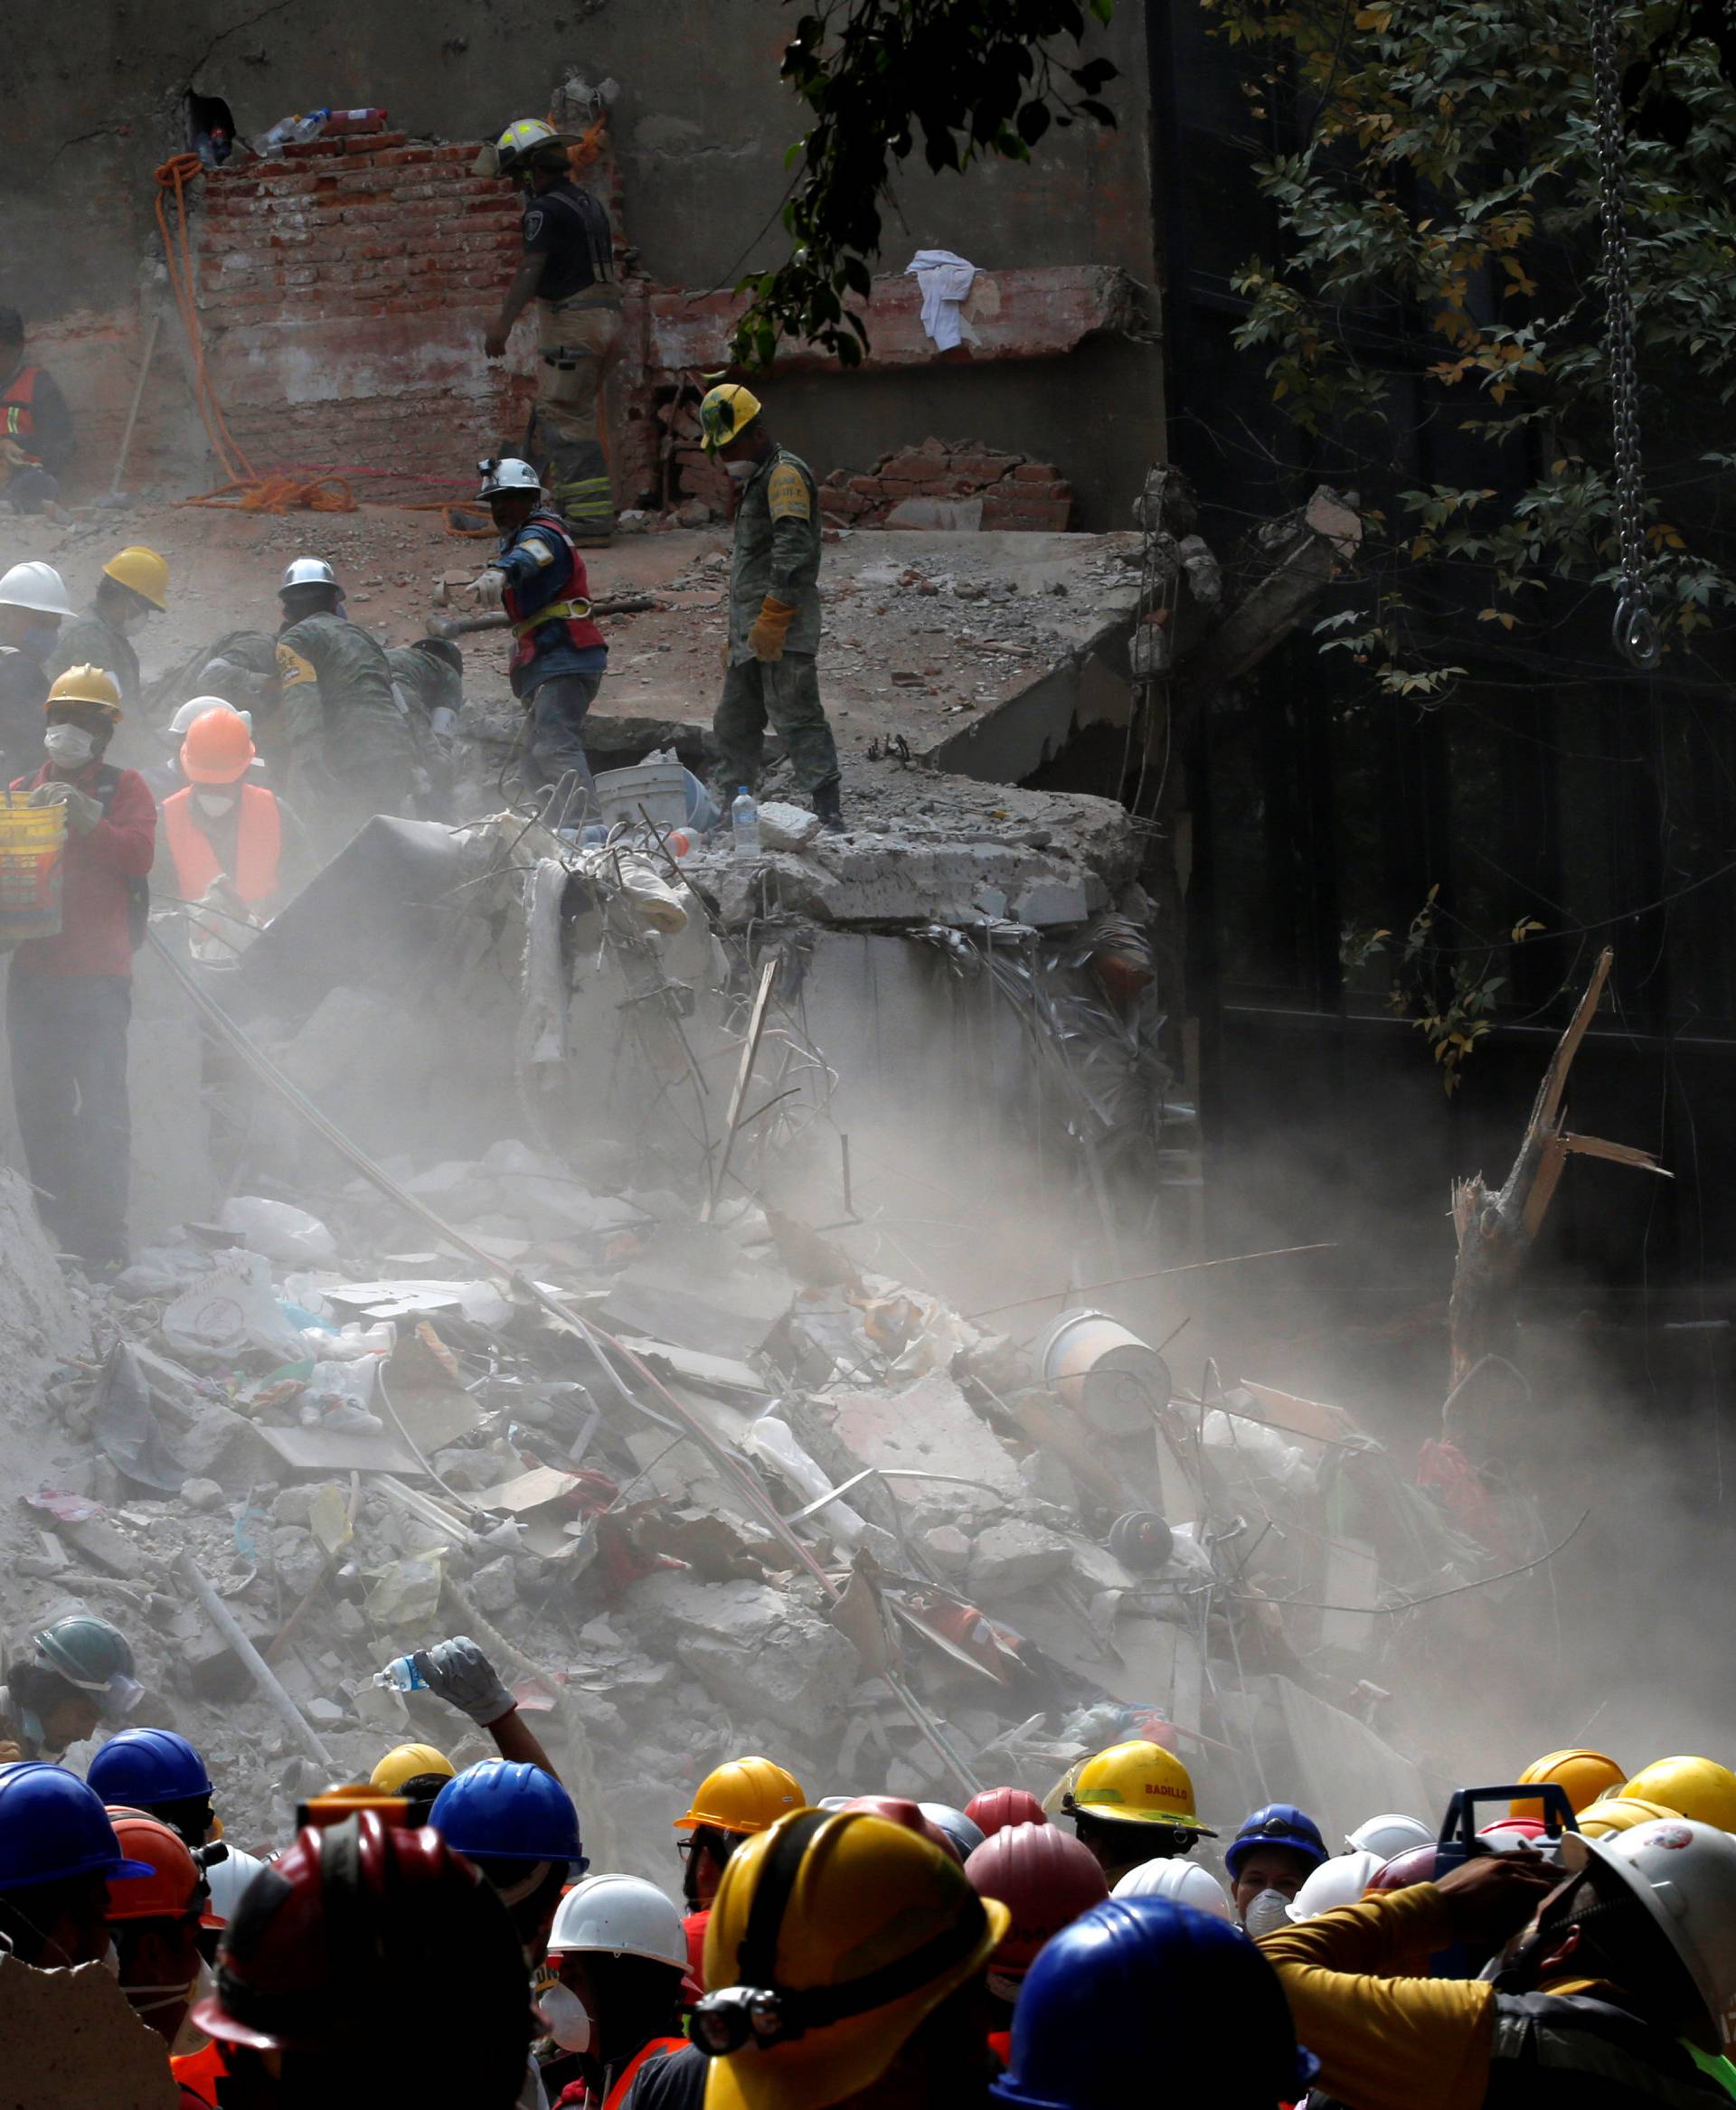 Members of Israeli and Mexican rescue teams and volunteers search for survivors in the rubble of a collapsed building after an earthquake in Mexico City